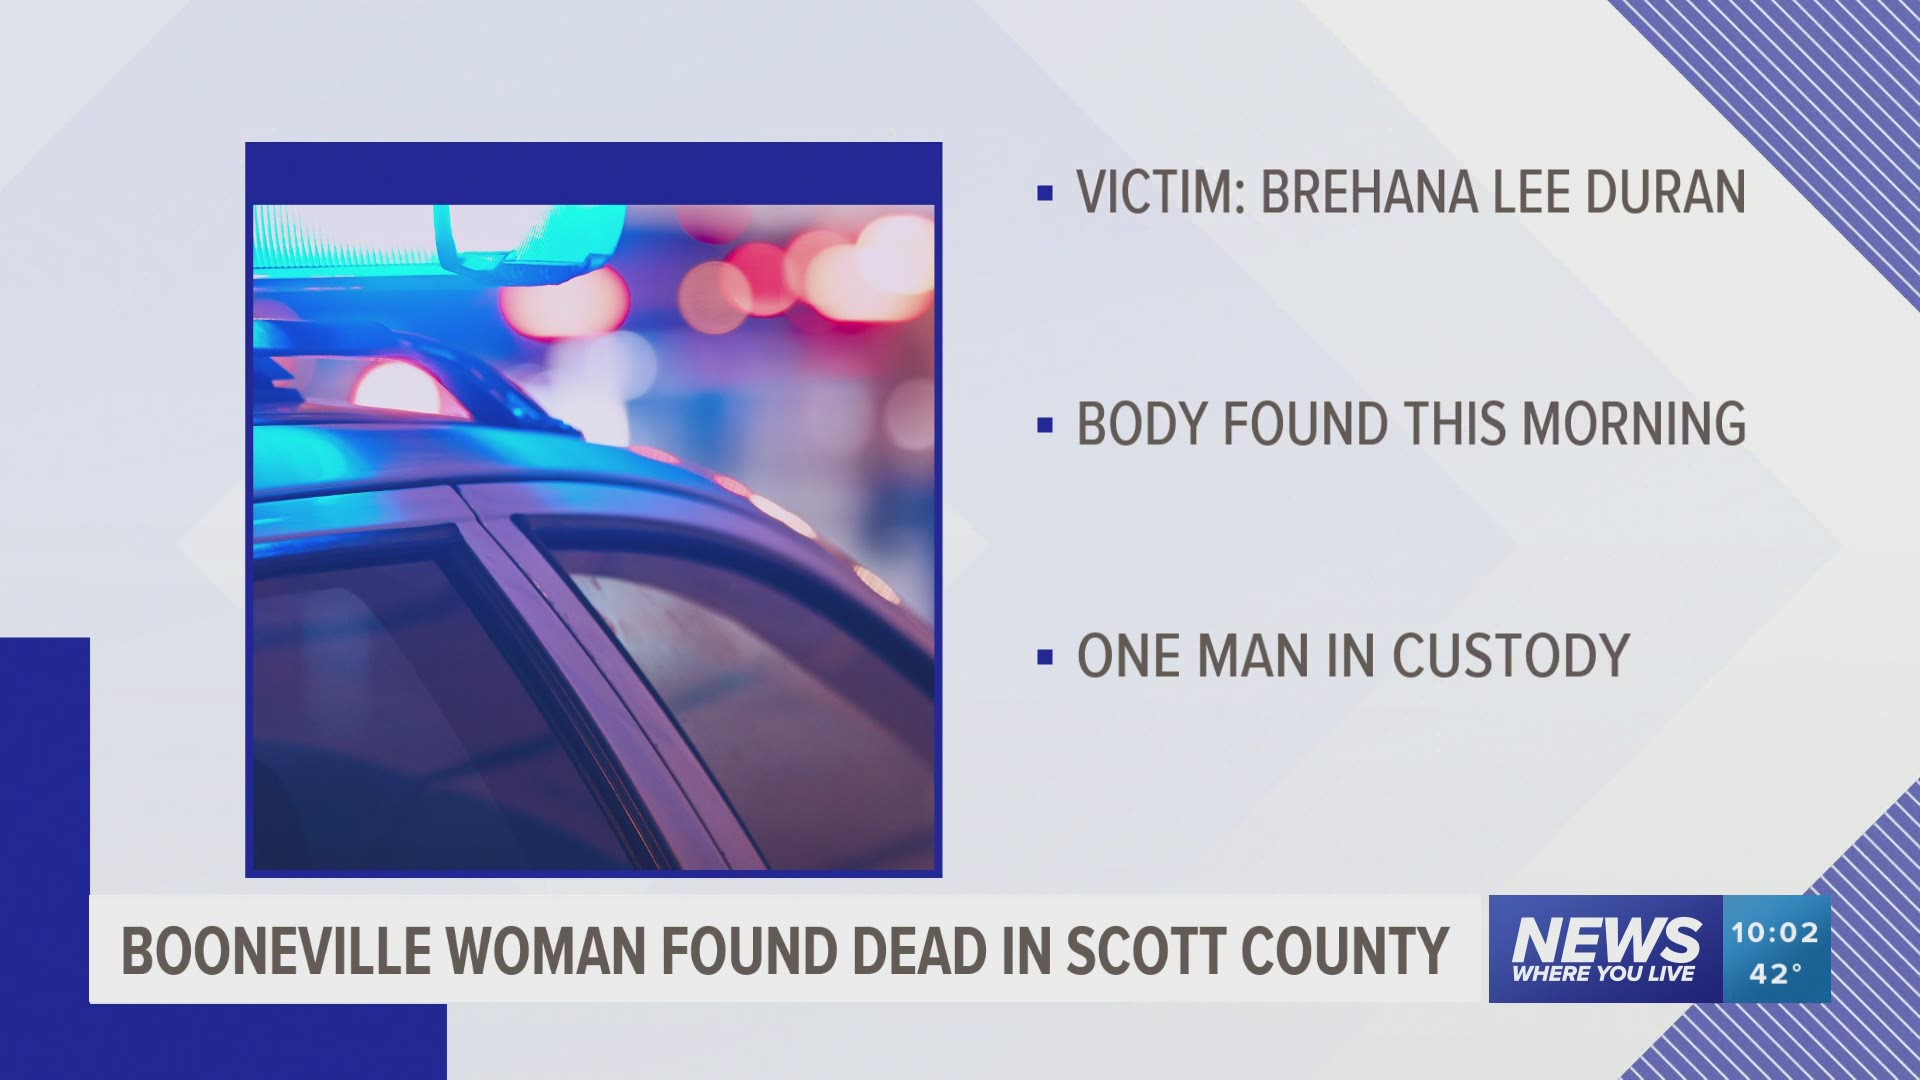 An apparent homicide was reported to the Scott County Sheriff's Department earlier today (Jan. 23).